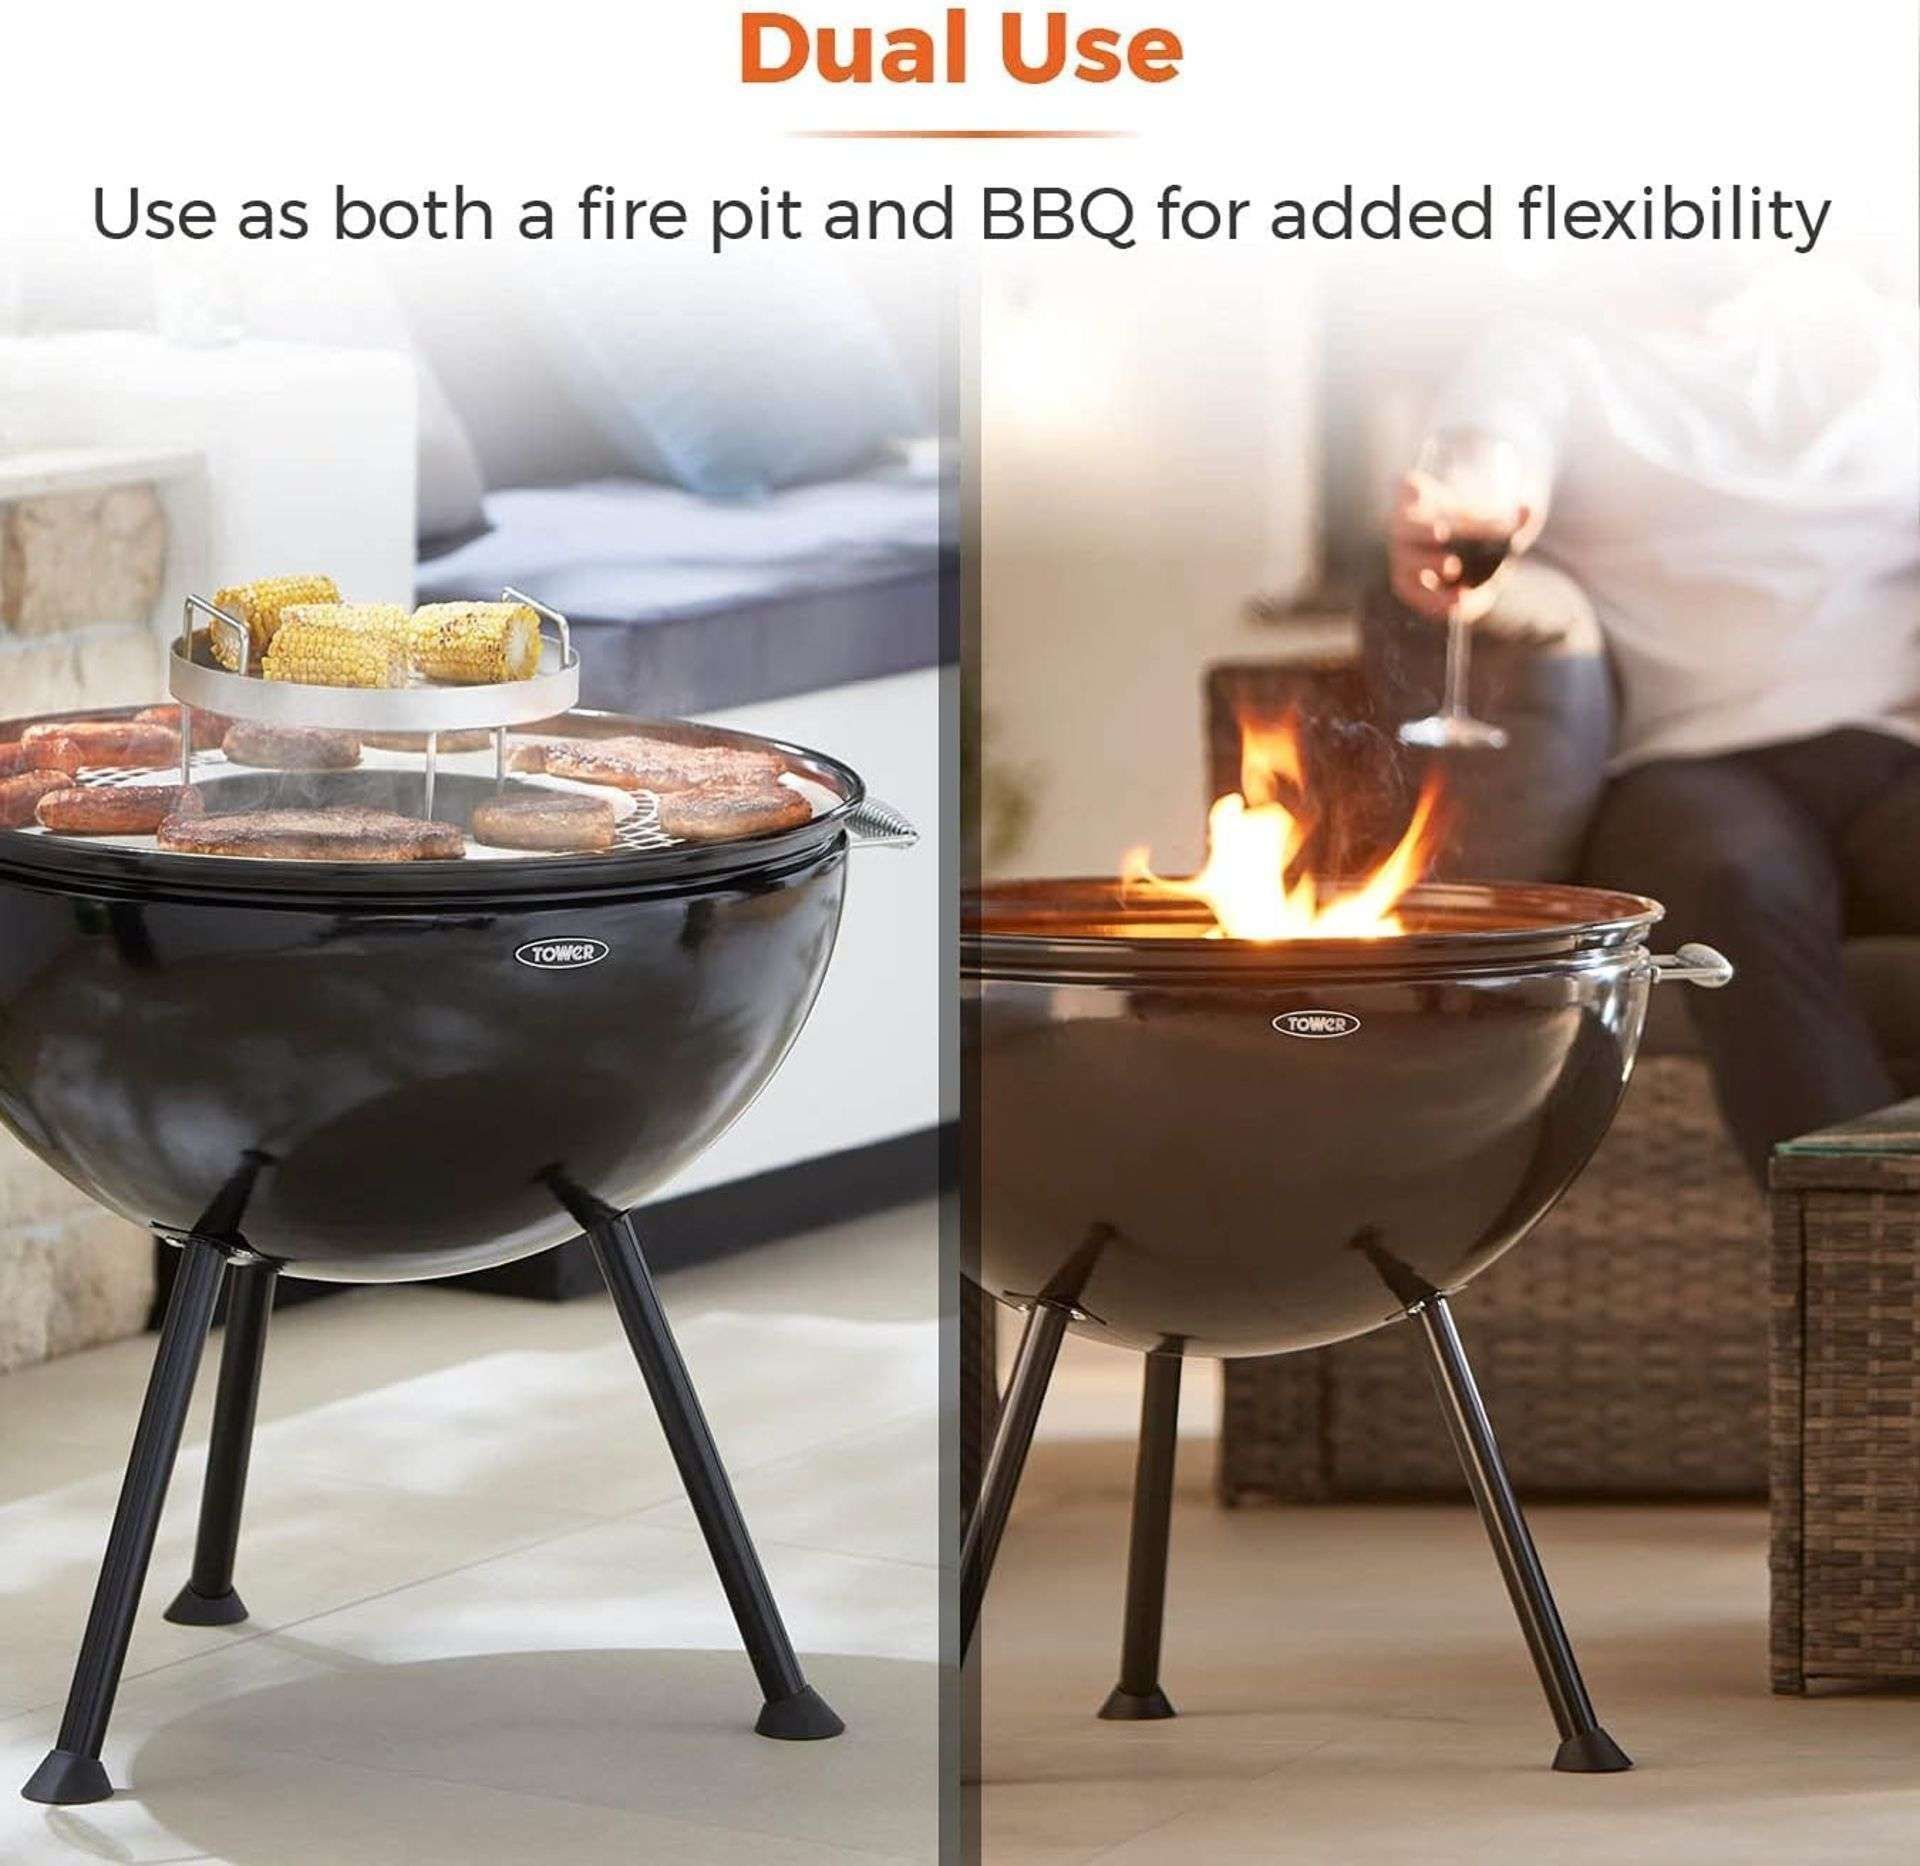 New & Boxed Tower Sphere Fire Pit and BBQ Grill, Black. (VQ577). DUAL USE â€“ This multi- - Image 3 of 4